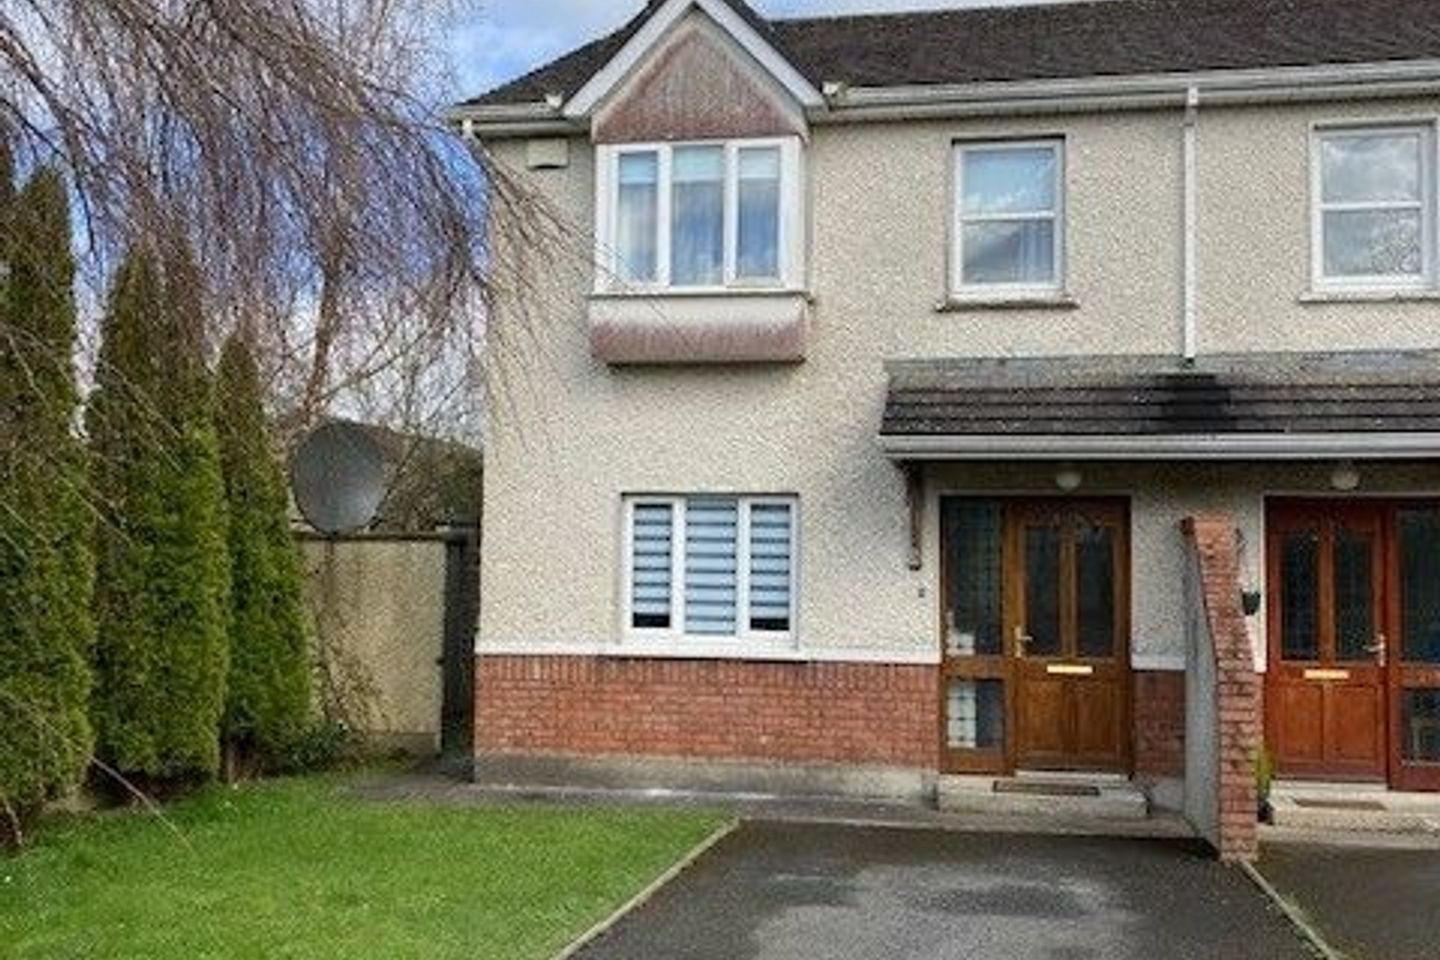 214 Rosemount, Clongower, Thurles, Co. Tipperary, E41R8Y0